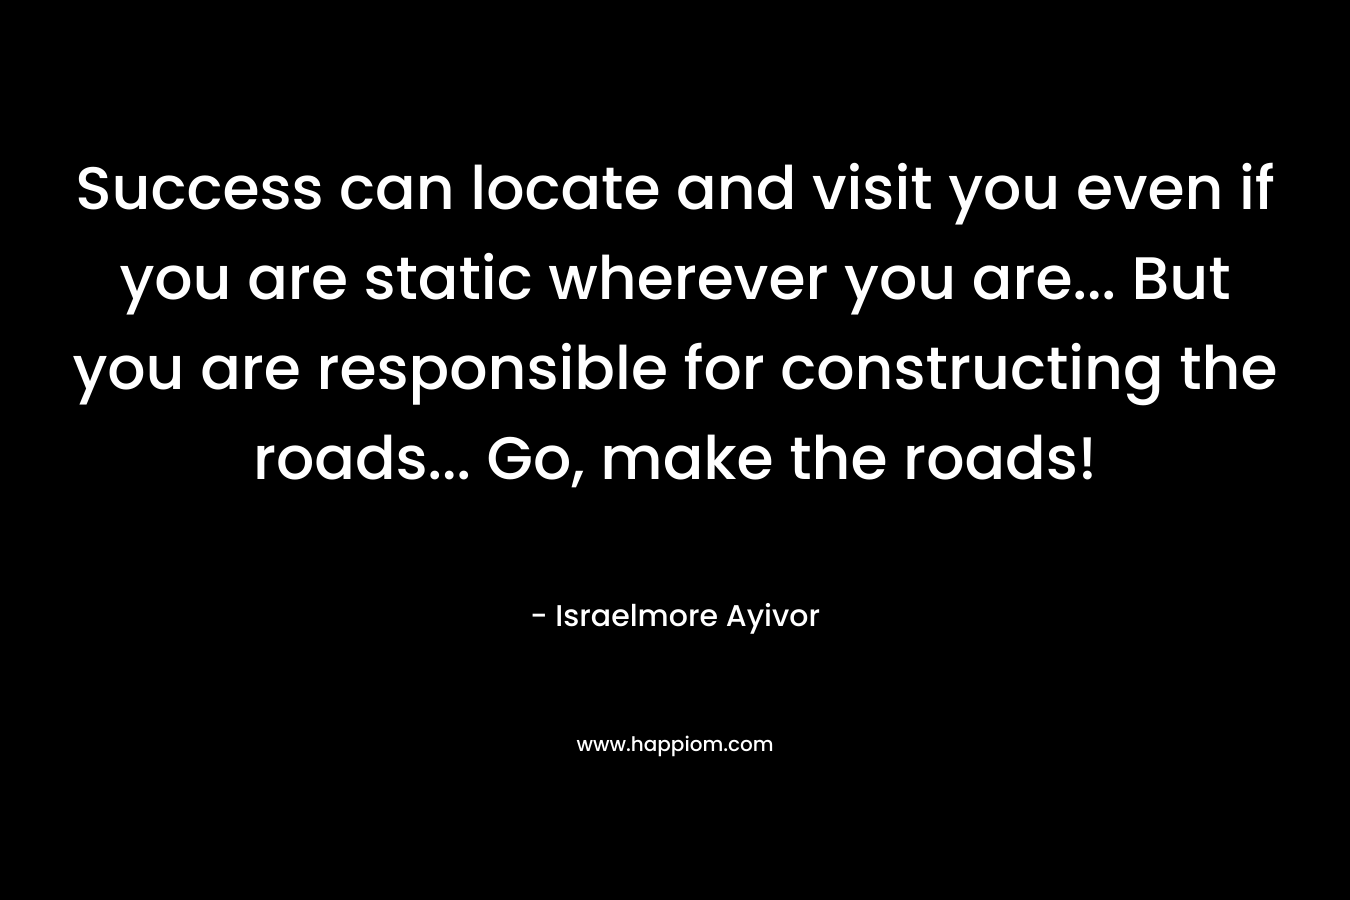 Success can locate and visit you even if you are static wherever you are… But you are responsible for constructing the roads… Go, make the roads! – Israelmore Ayivor